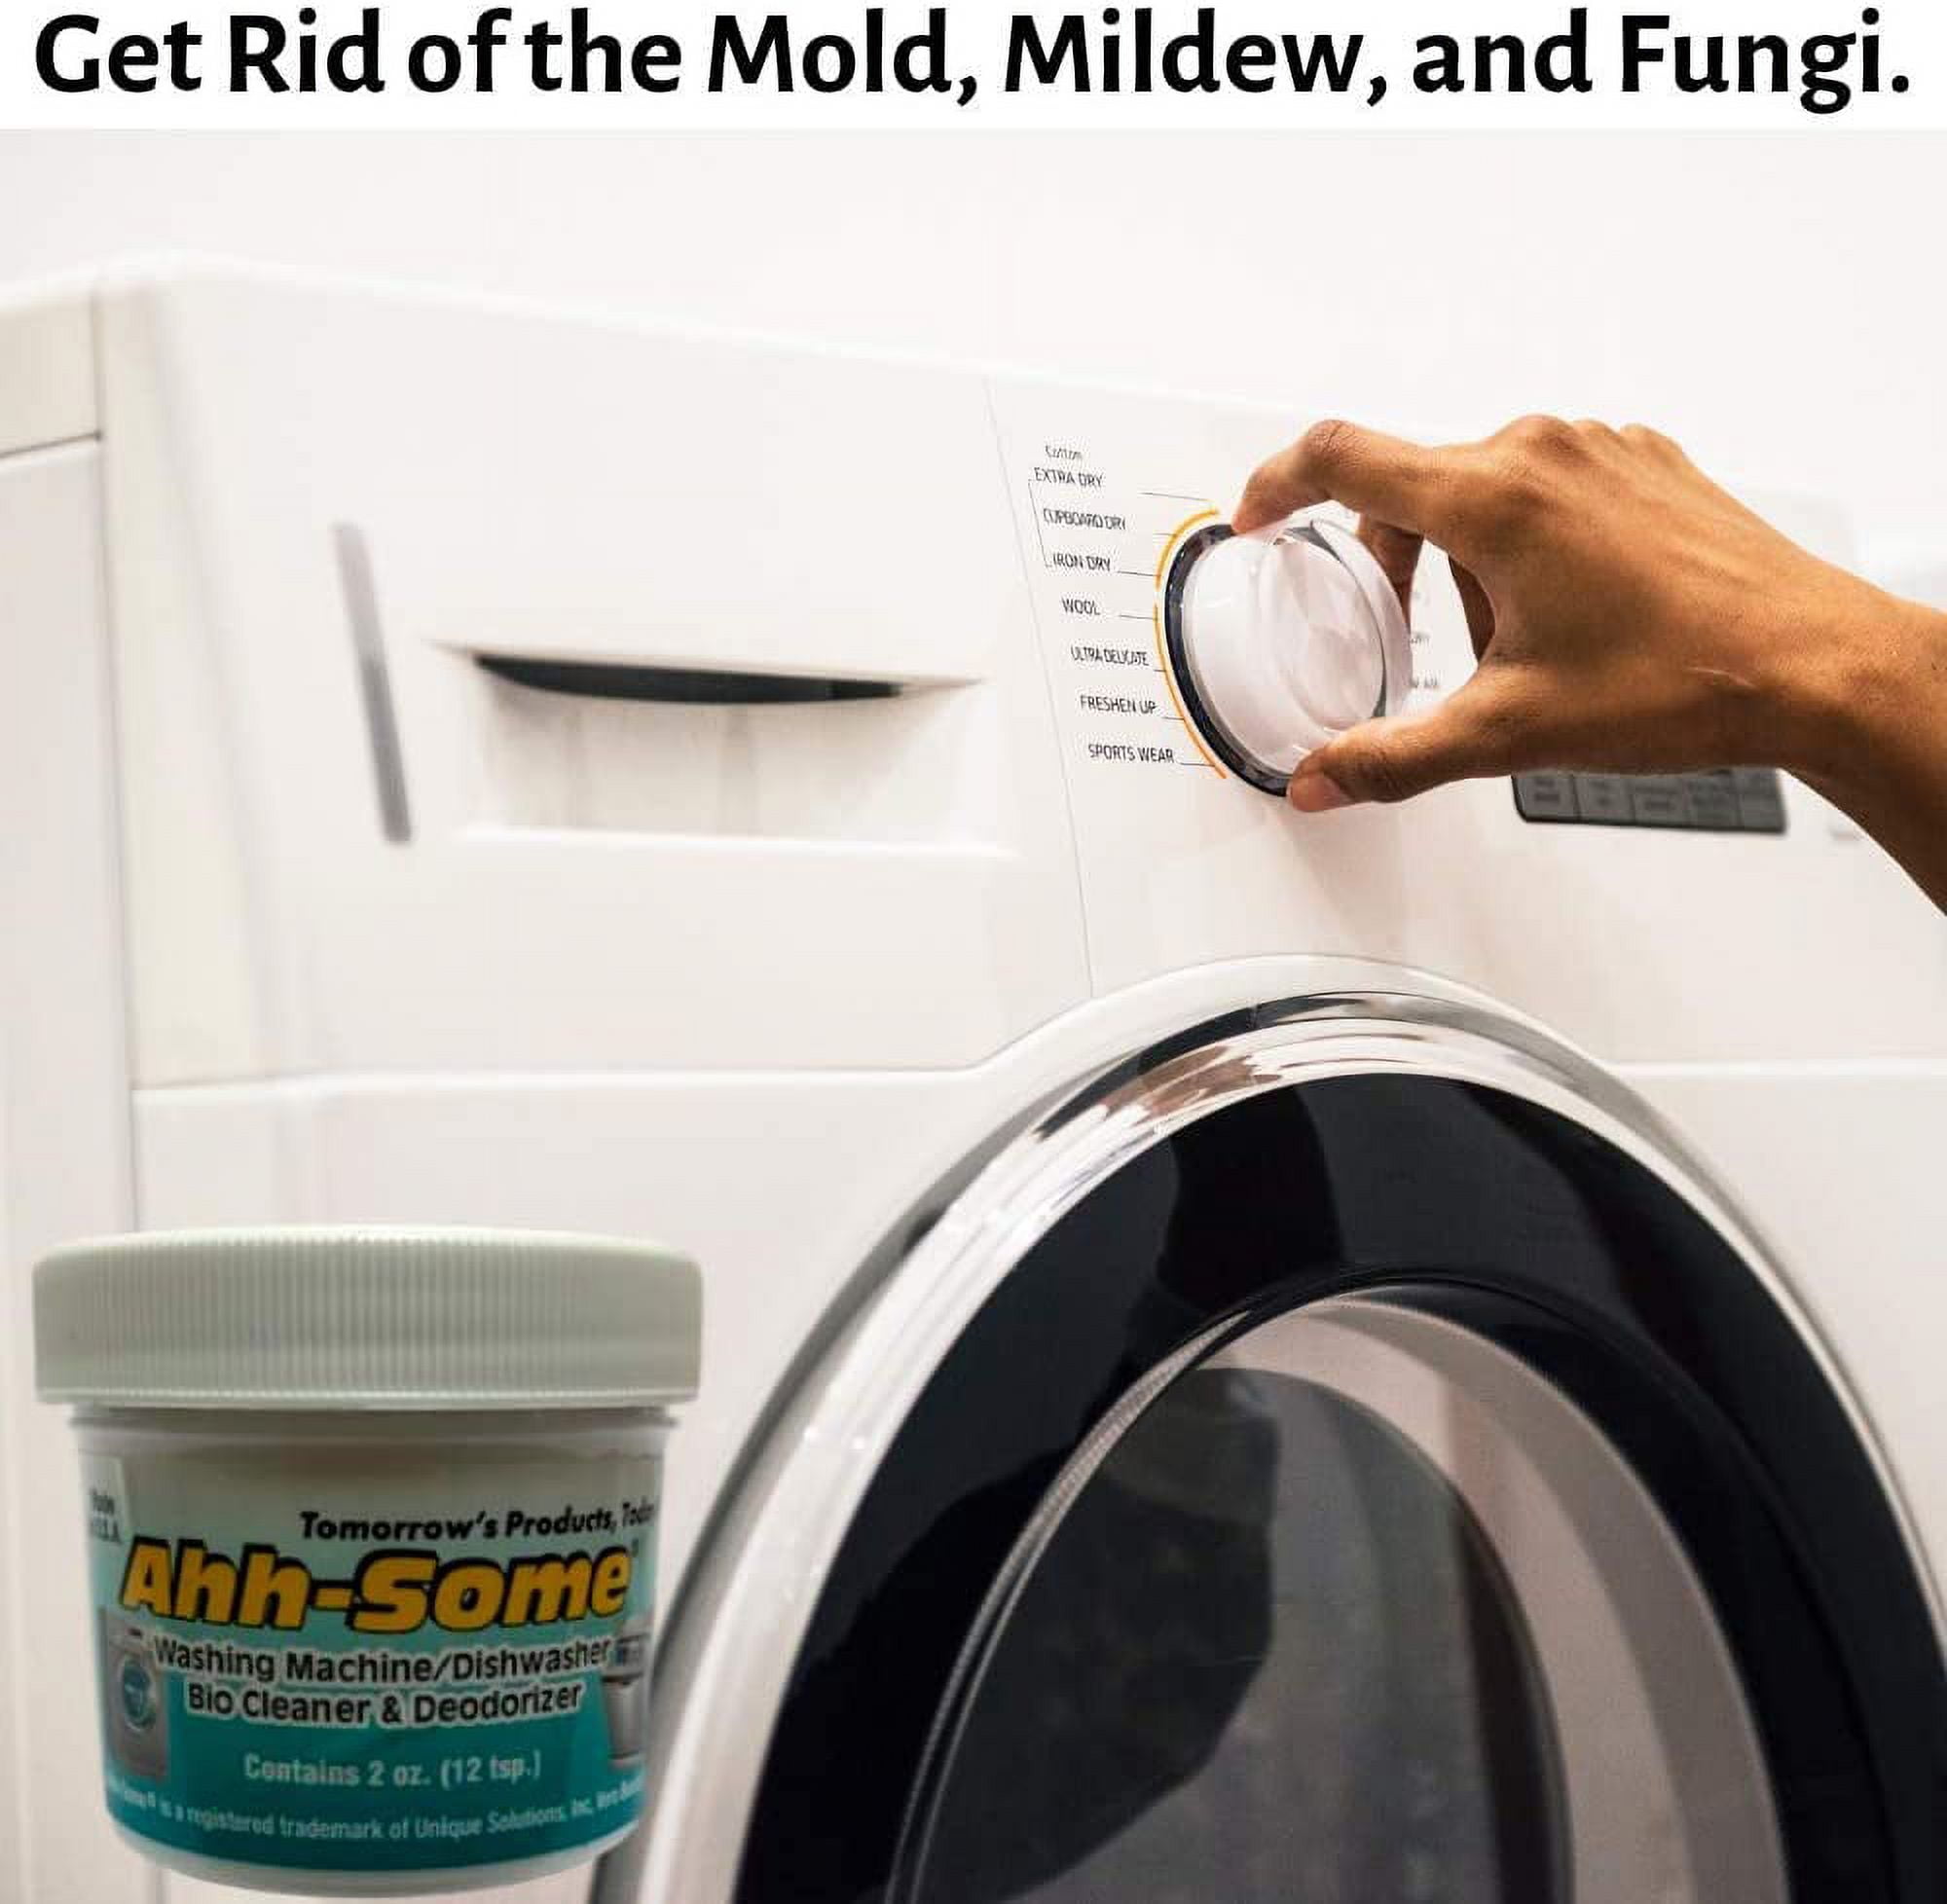 I'm a cleaning expert – the hidden spot in washing machine most people are  forgetting to clean